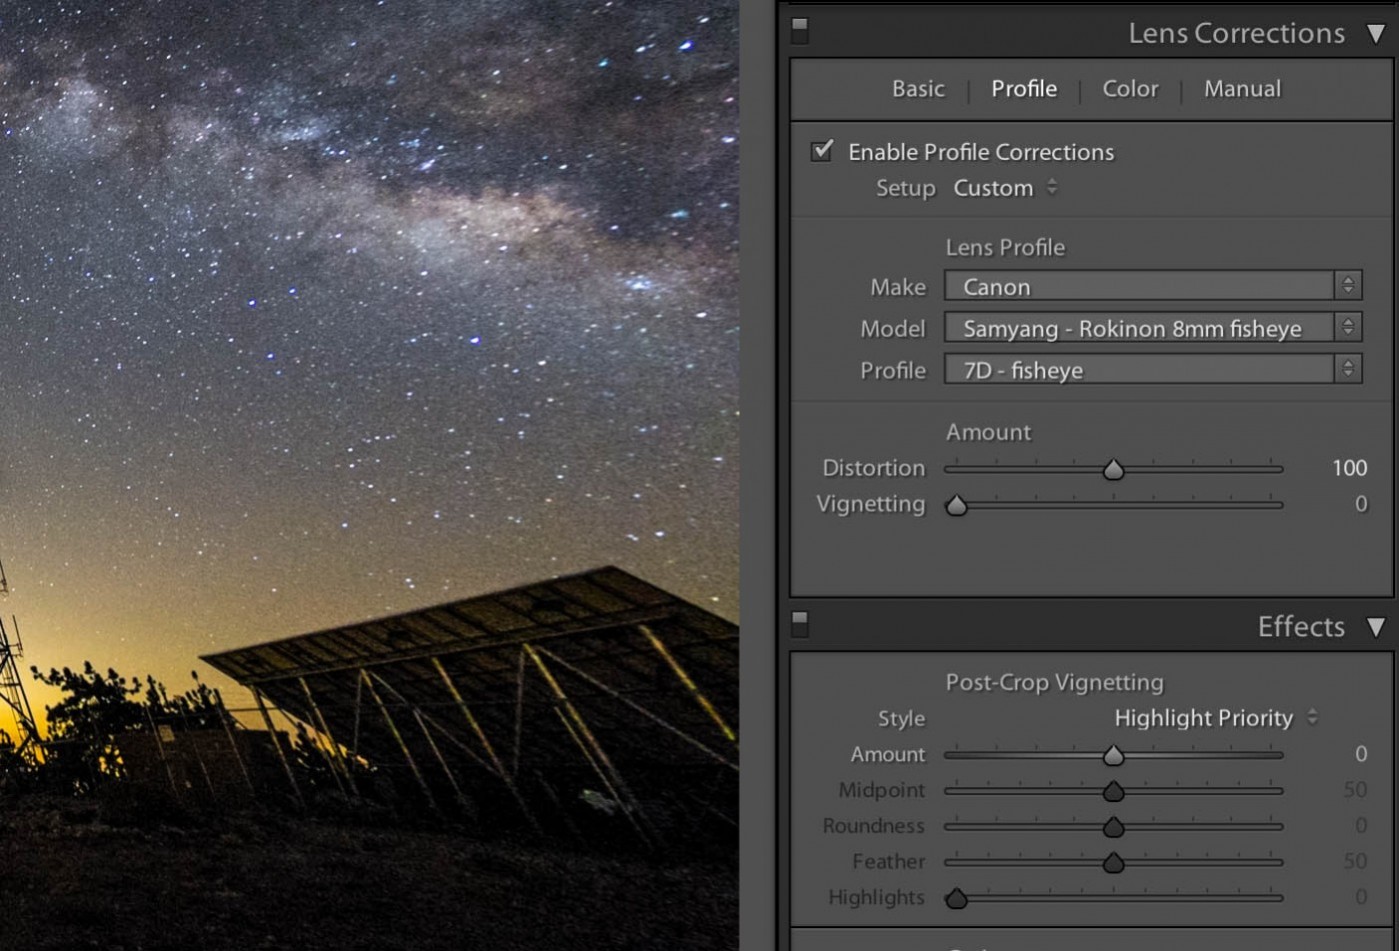 Adobe Lightroom has a built-in lens correction tool that can correct fisheye lenses after downloading the appropriate profile from the Adobe Lens Profile Downloader